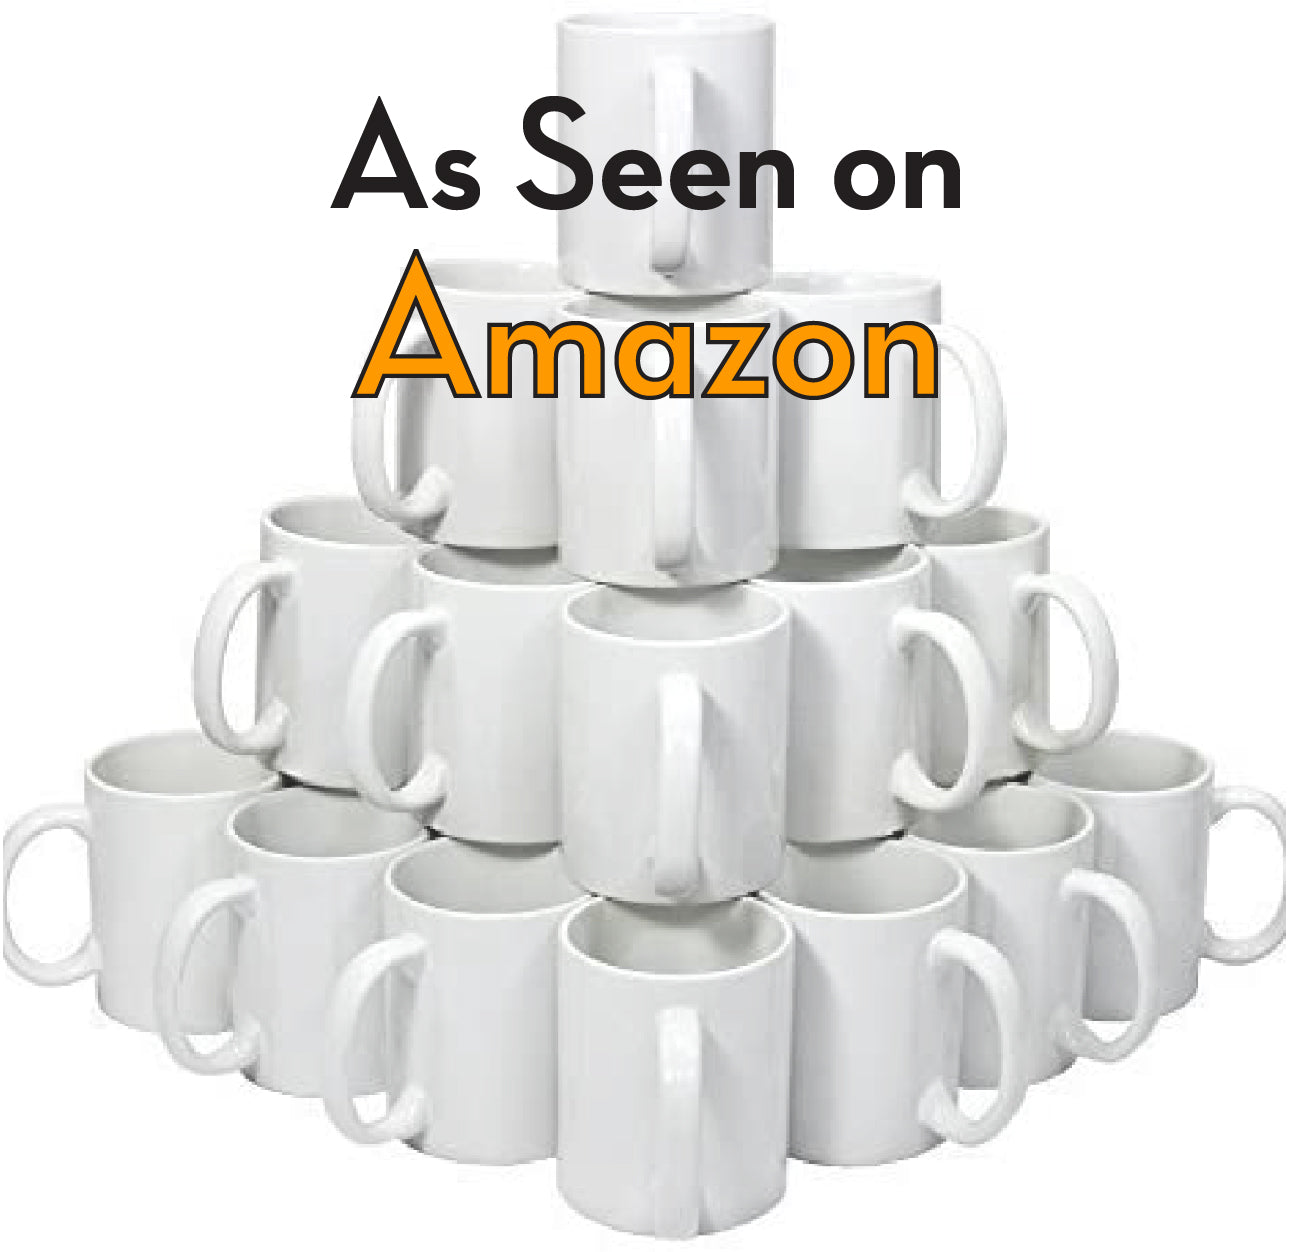 Image of stack of 911 sublimation mugs with As seen on amazon written on top